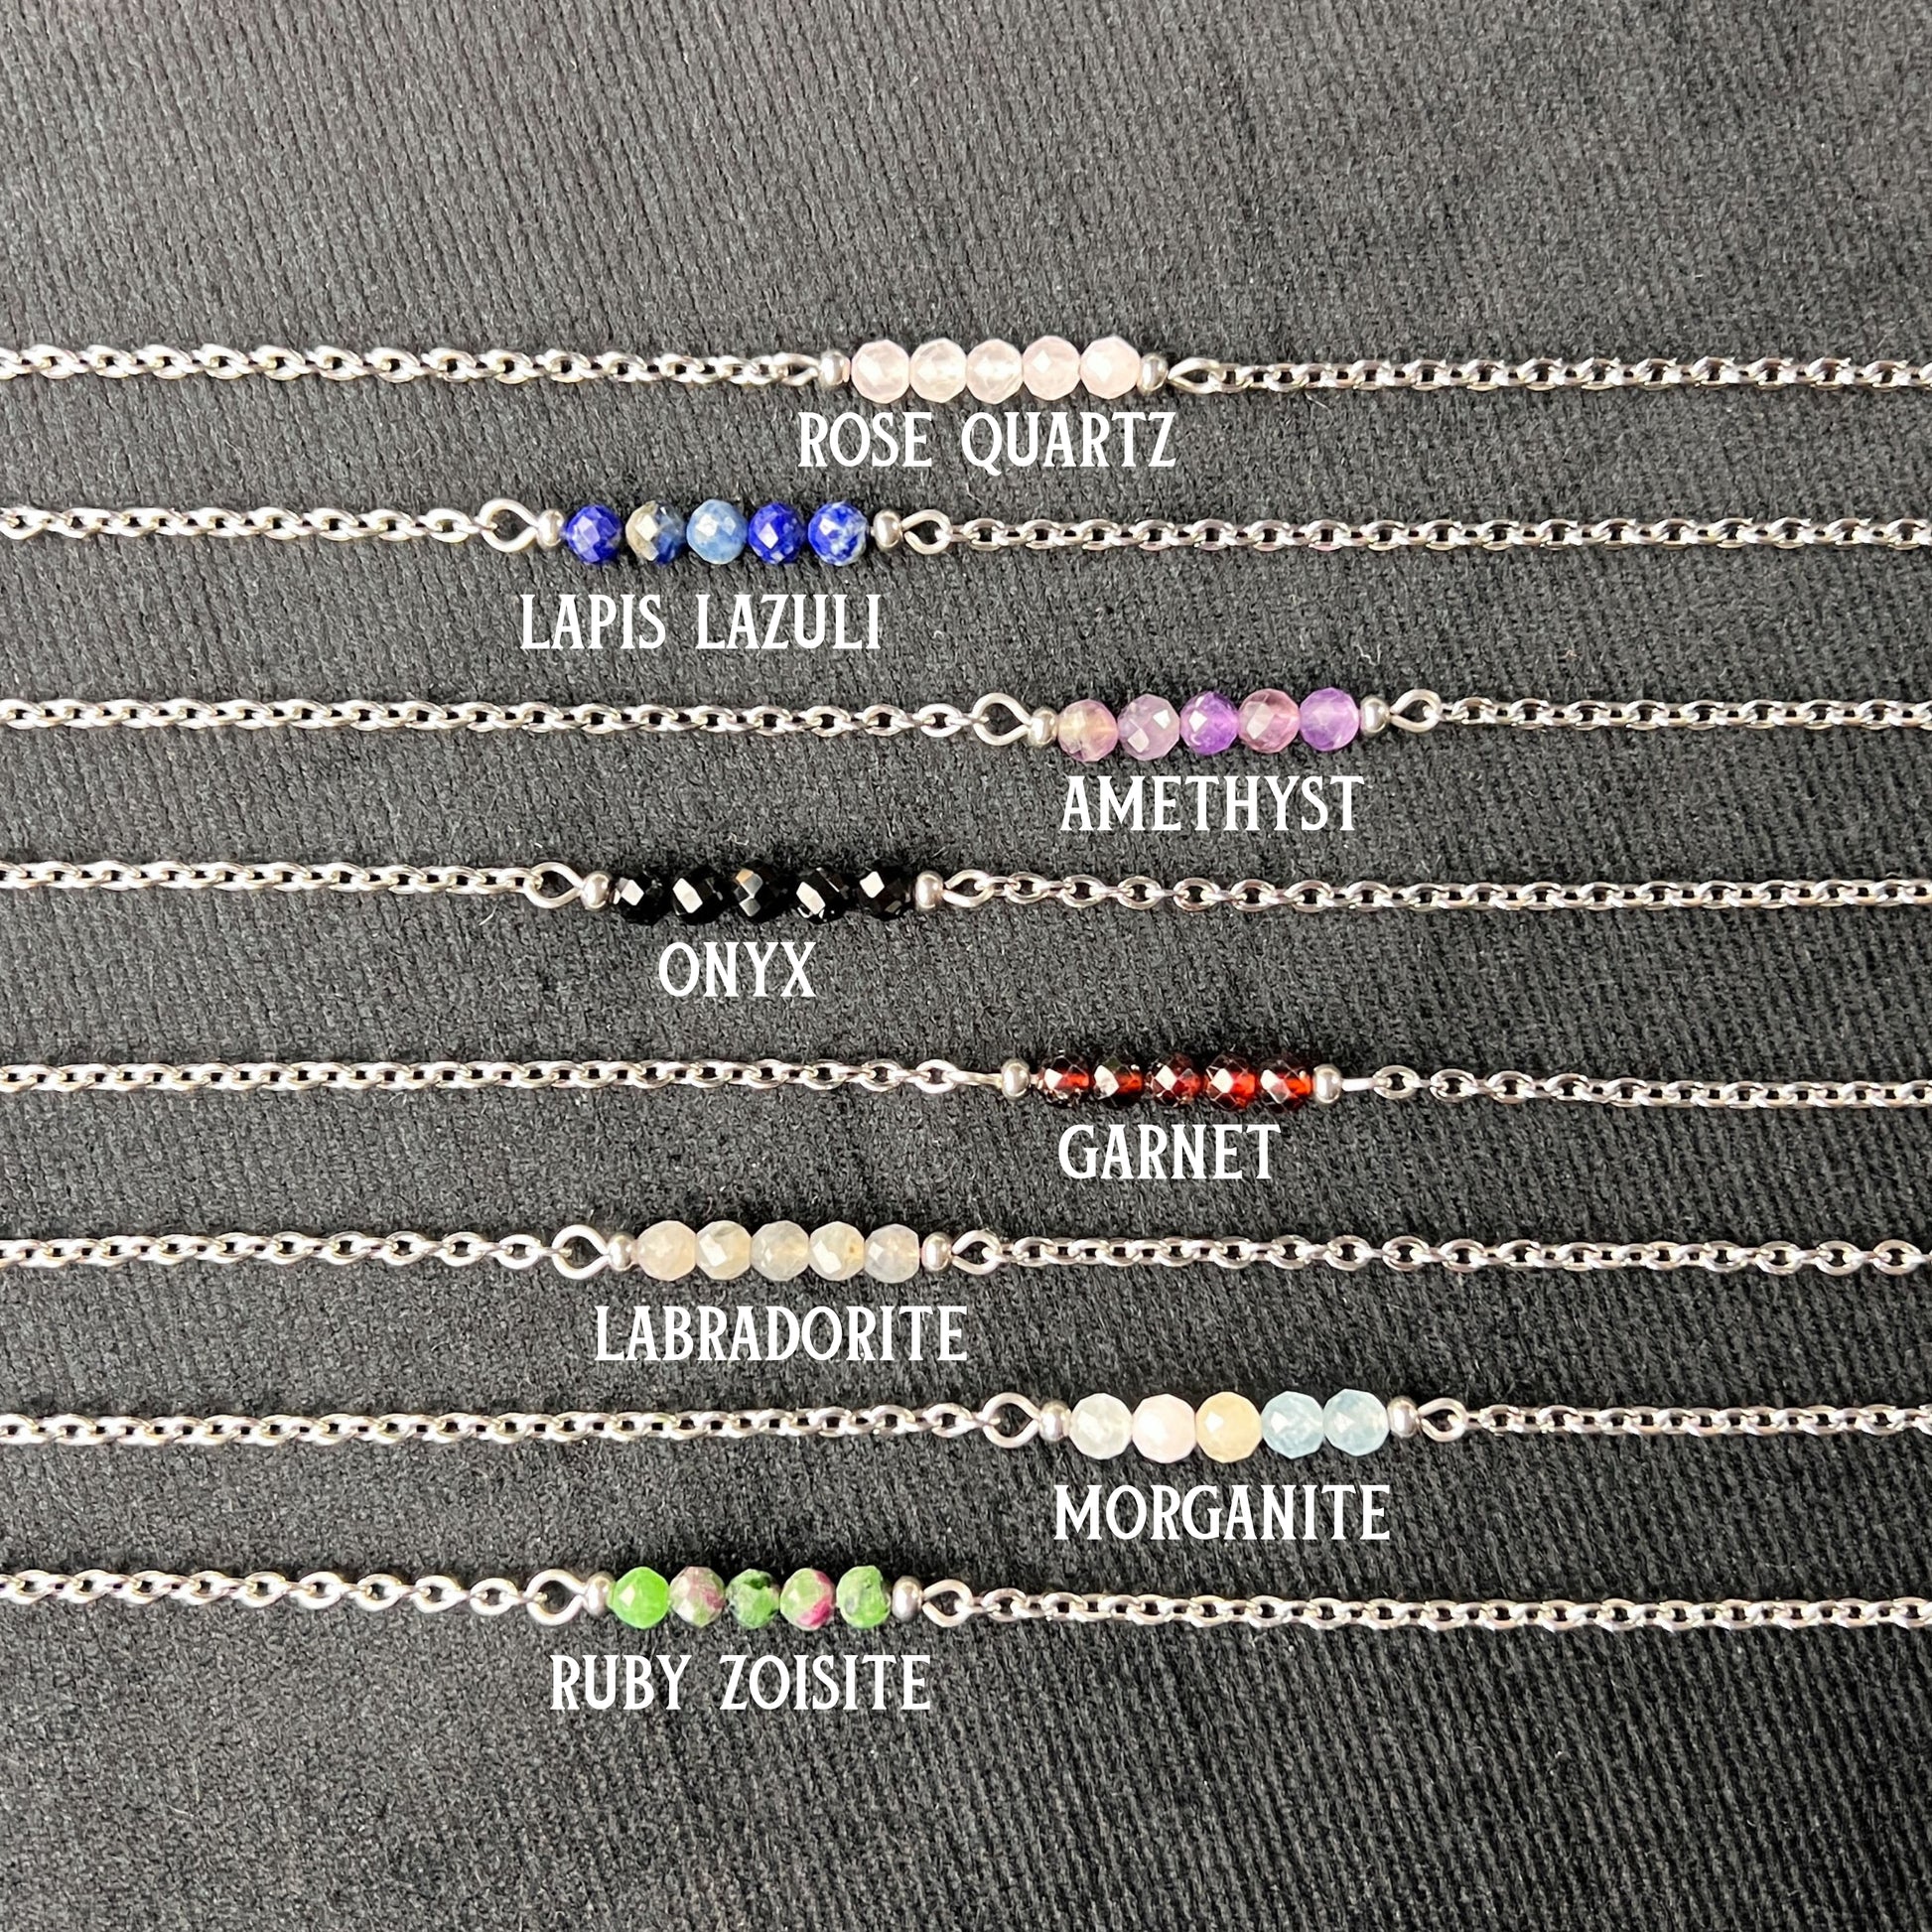 Faceted beads gemstone necklace, hypoallergenic waterproof stainless steel Baguette Magick